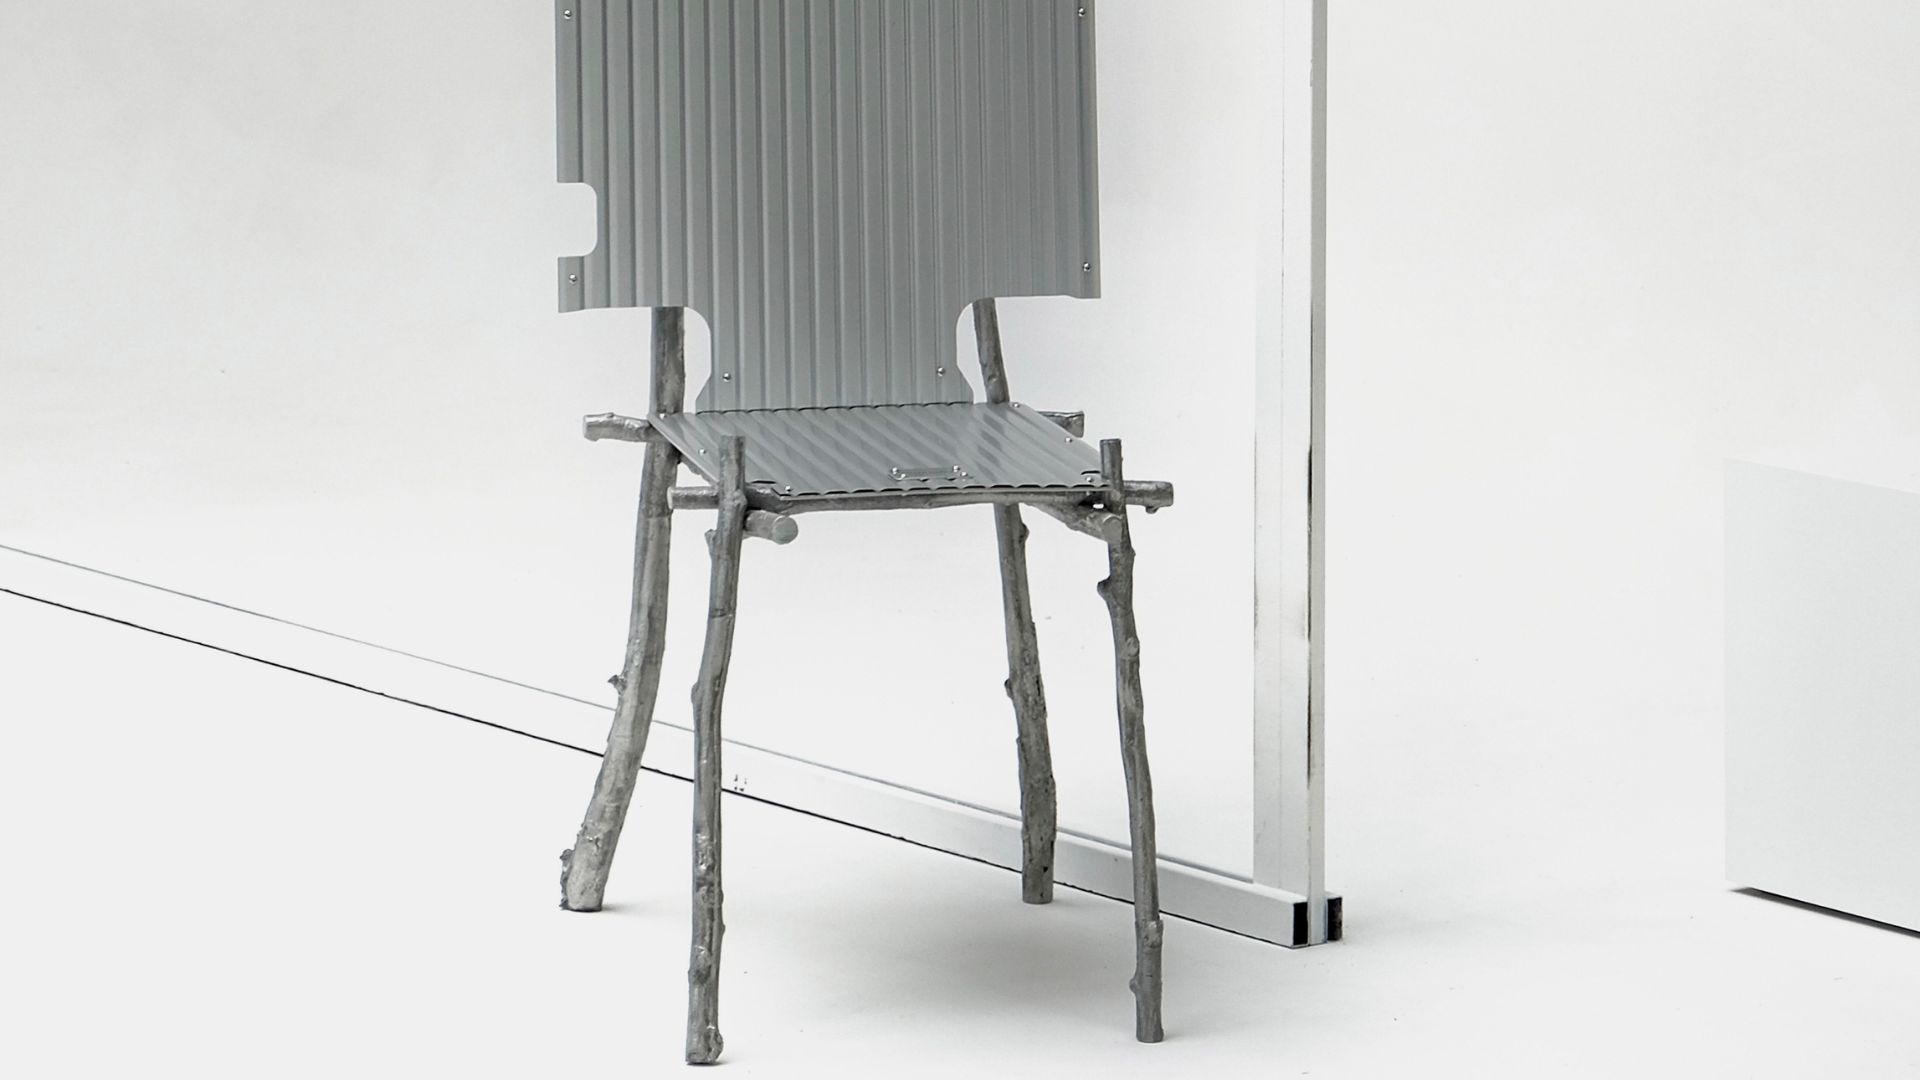 © Neo-primitive aluminum chair by Lee Sisan